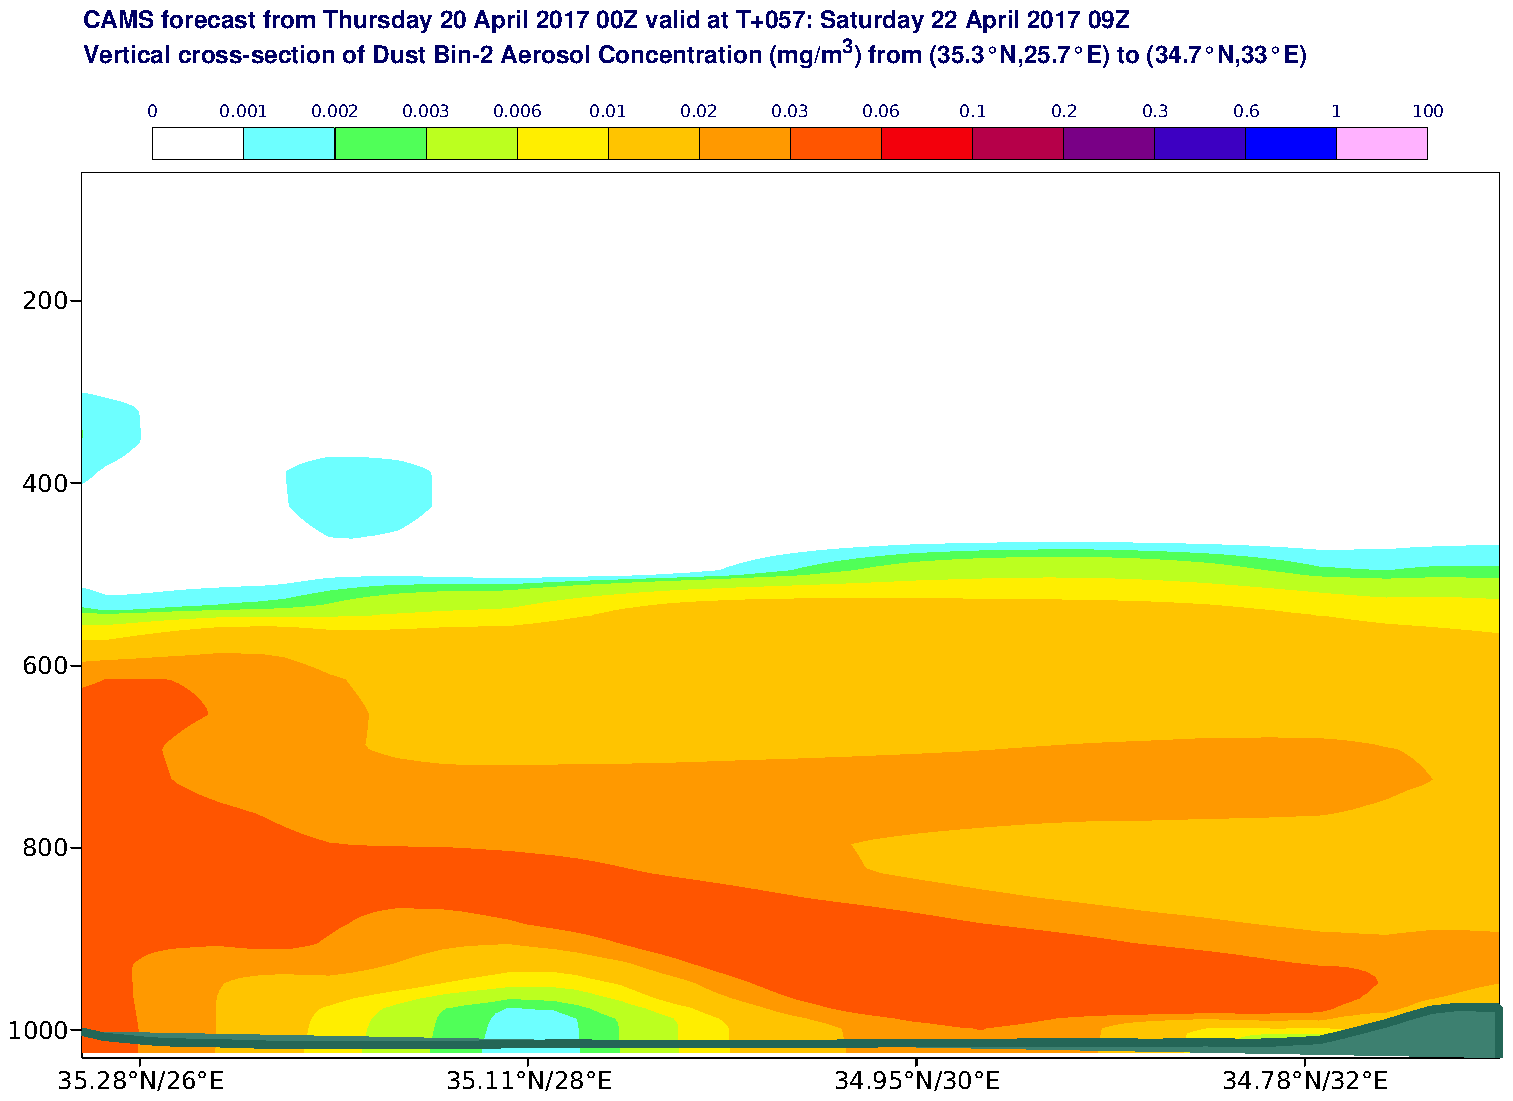 Vertical cross-section of Dust Bin-2 Aerosol Concentration (mg/m3) valid at T57 - 2017-04-22 09:00